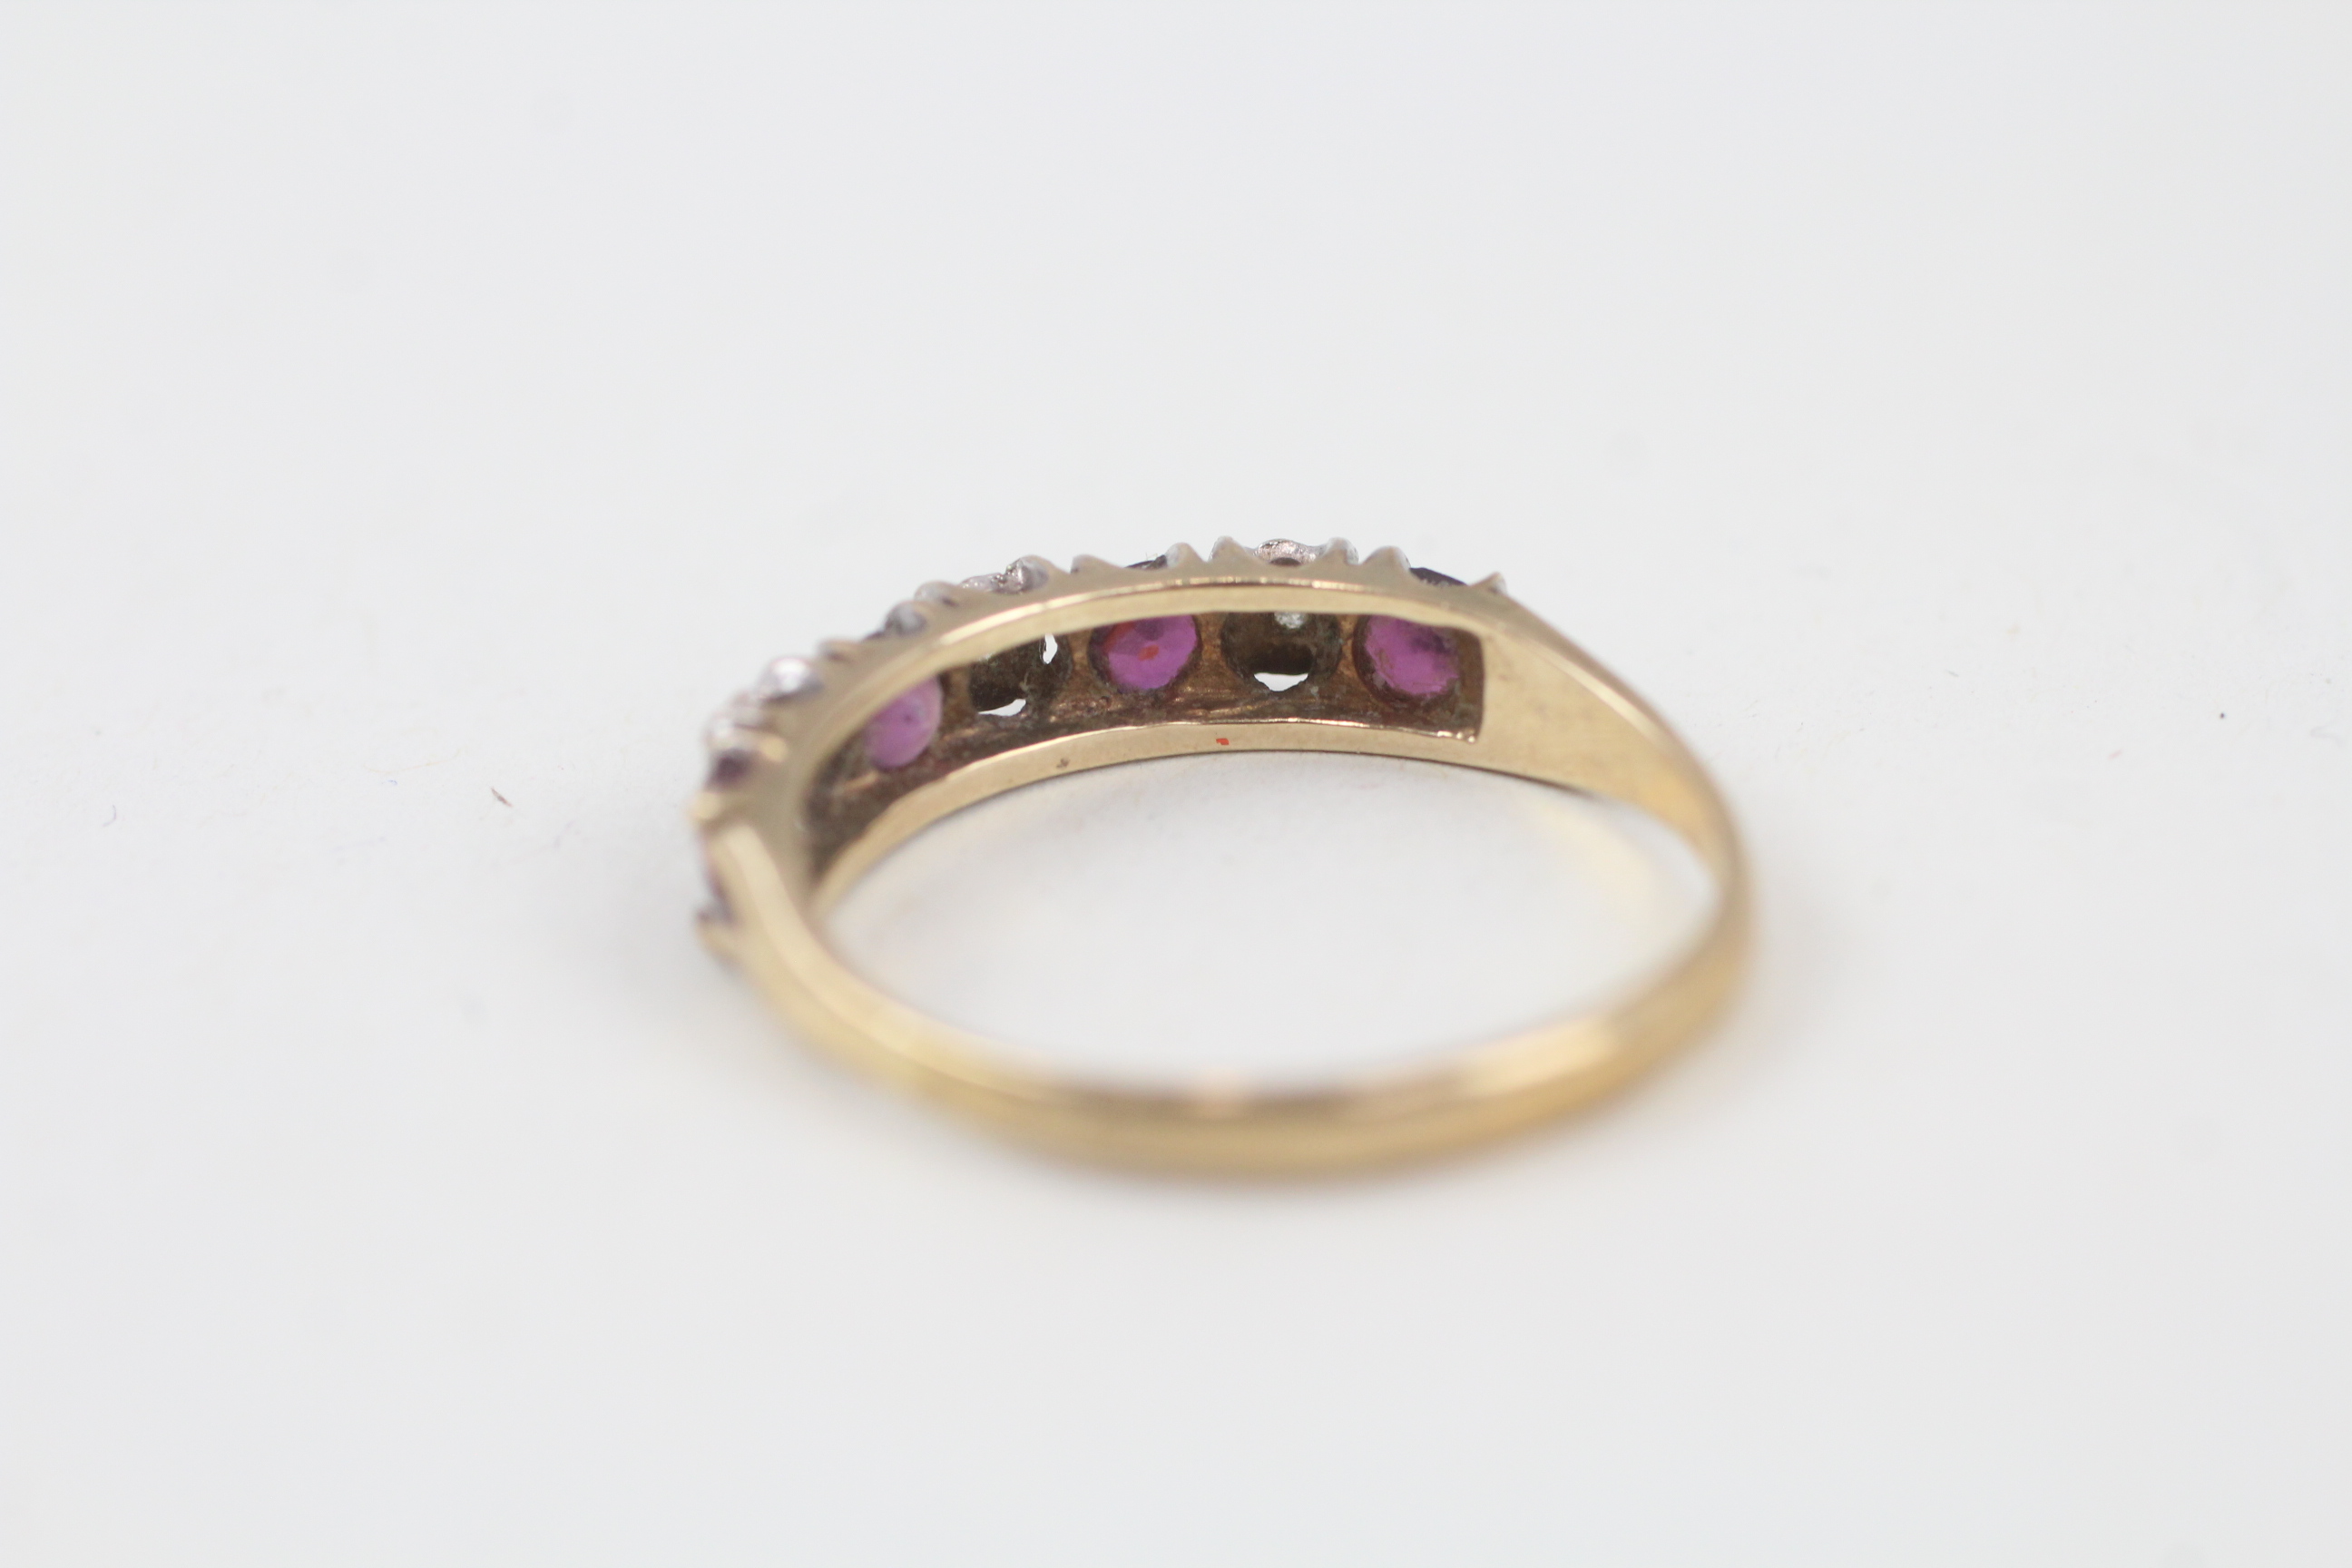 9ct gold diamond & ruby seven stone ring Size P 1/2 - 2 g - Image 5 of 6